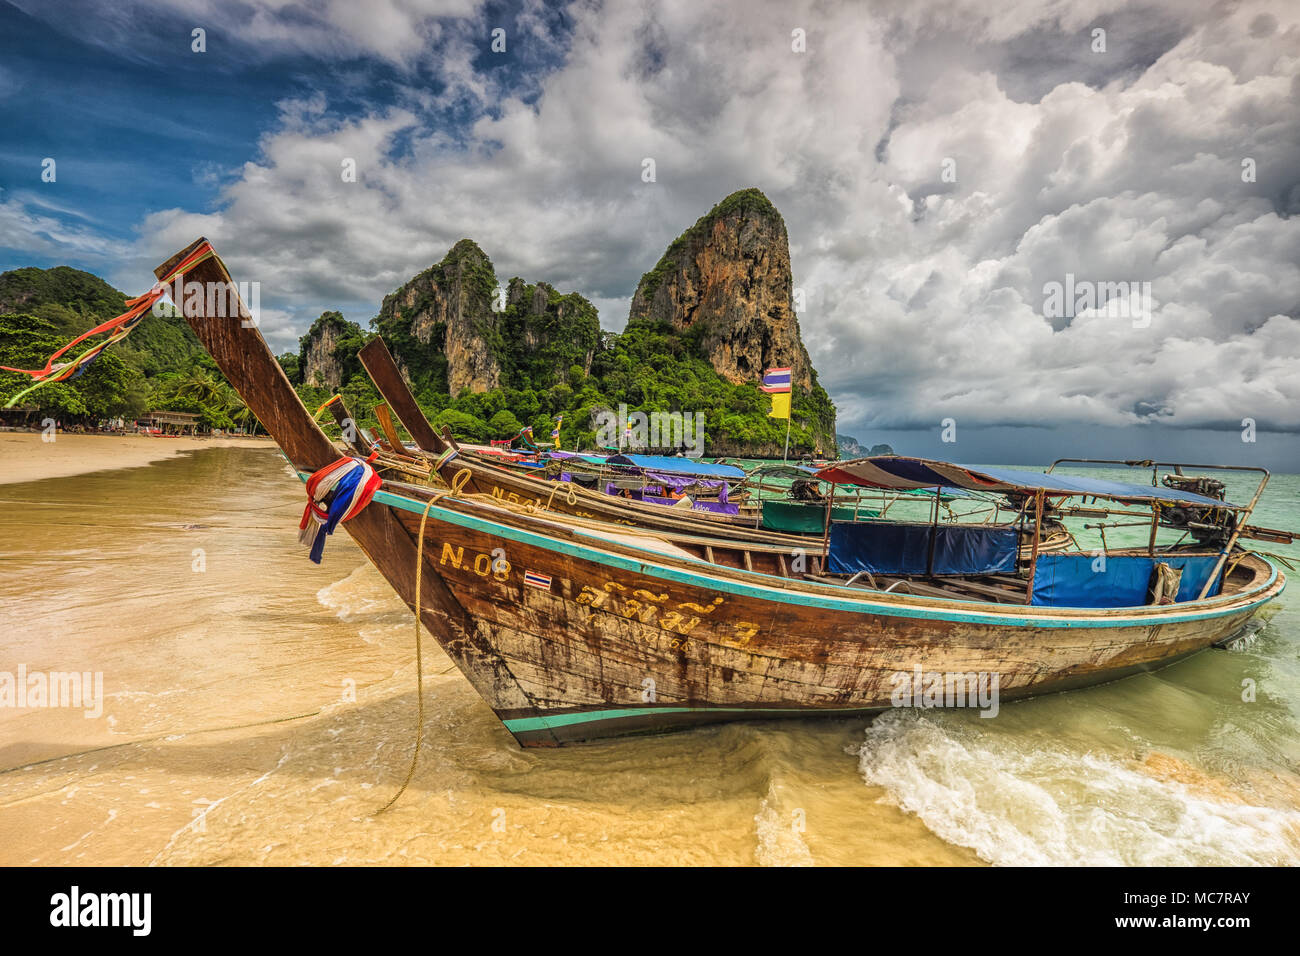 Colorful traditional longtail Thai boats decorated with ribbons. Tropical sand beach with limestone cliff and cloudy sky on background. Thailand. Stock Photo